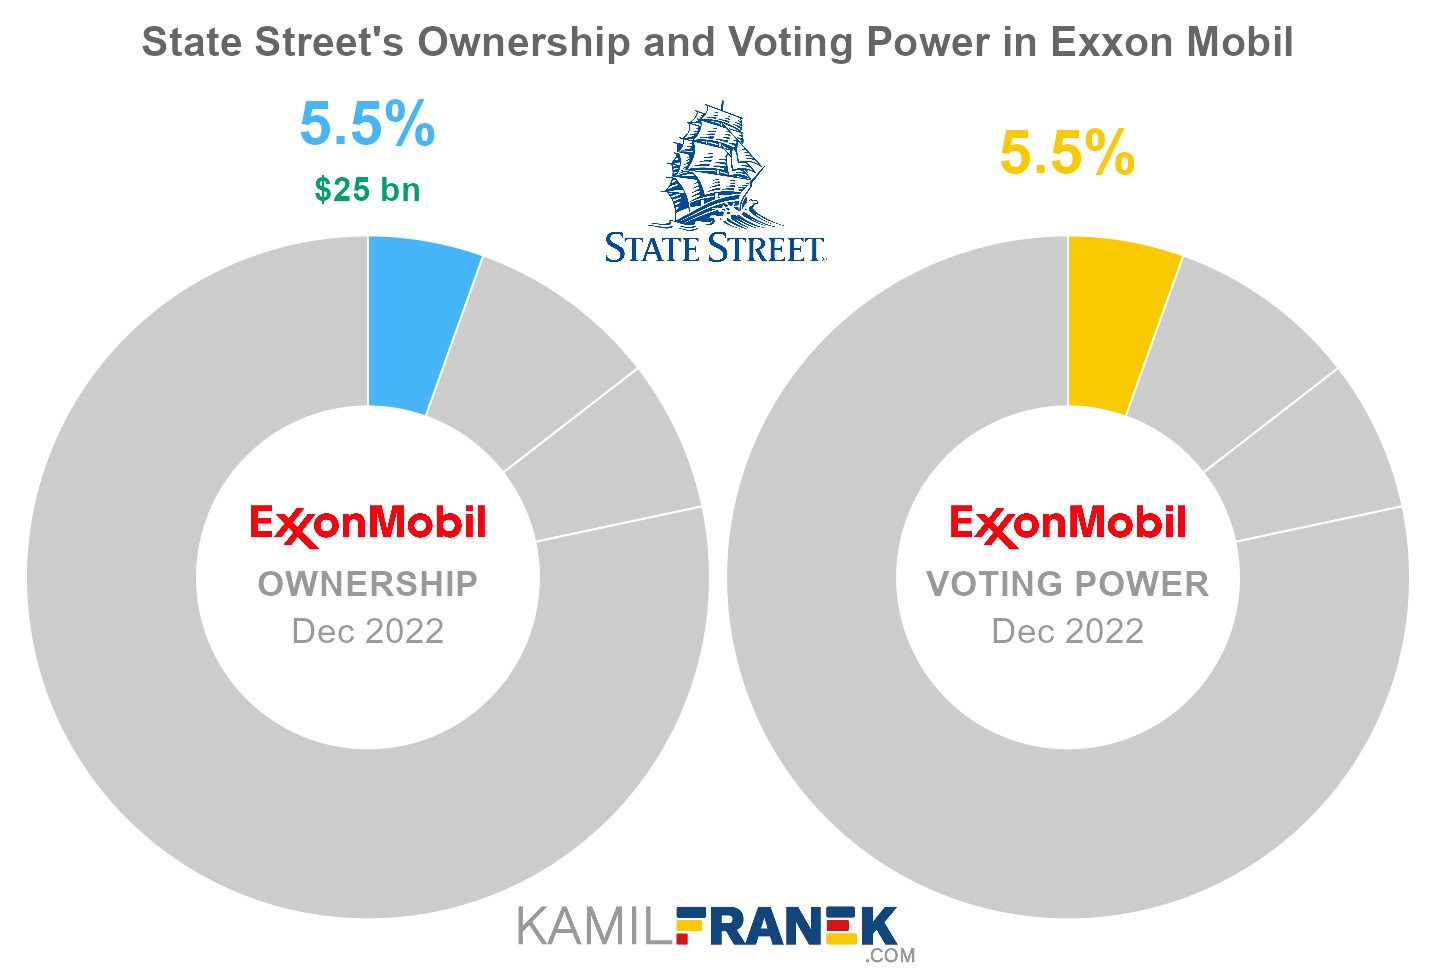 State Street's share ownership and voting power in Exxon Mobil (chart)